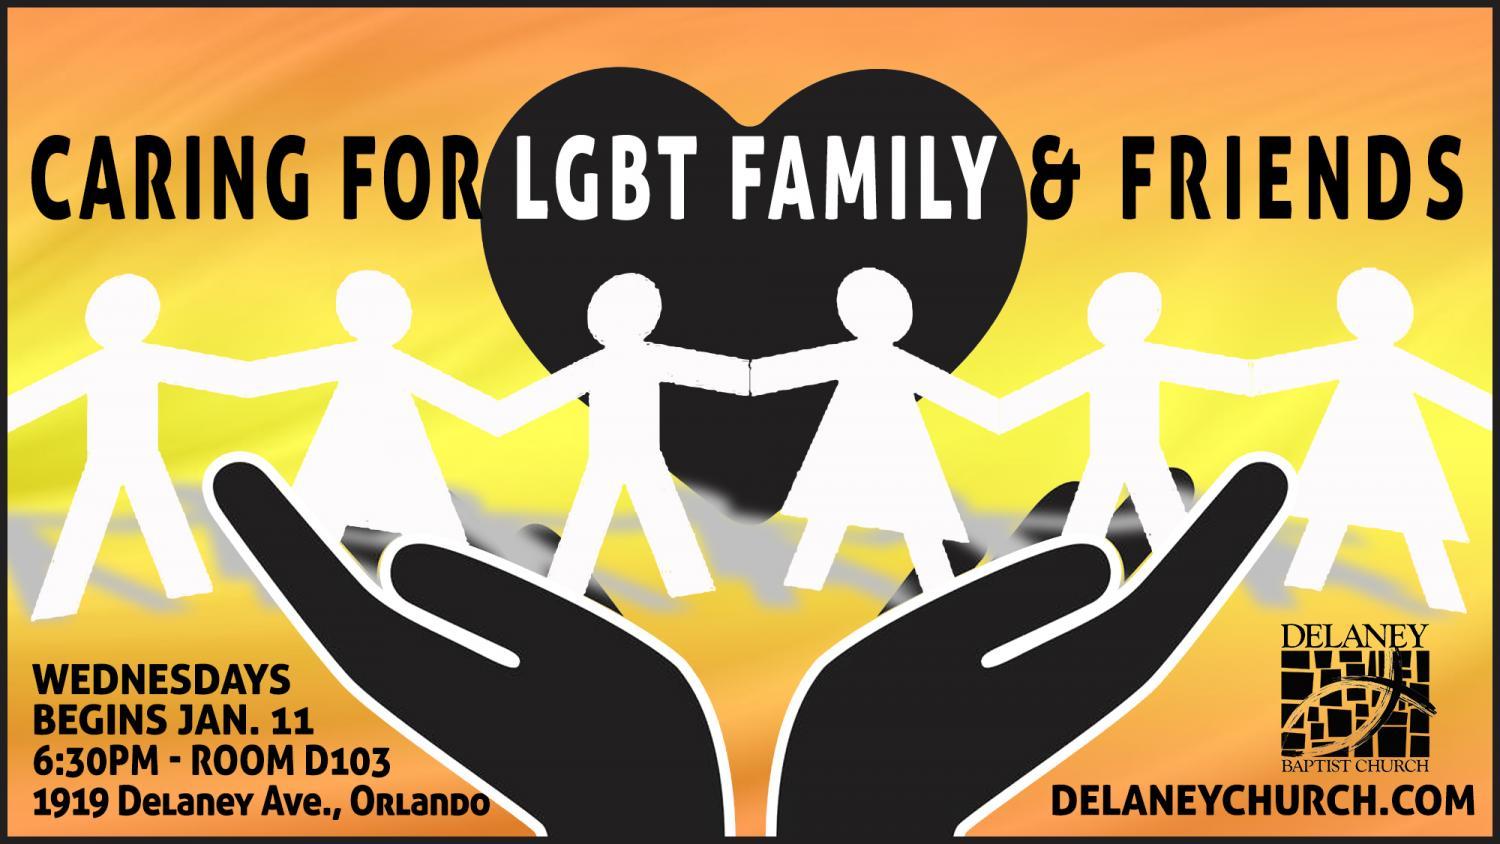 Caring for LGBT Family & Friends